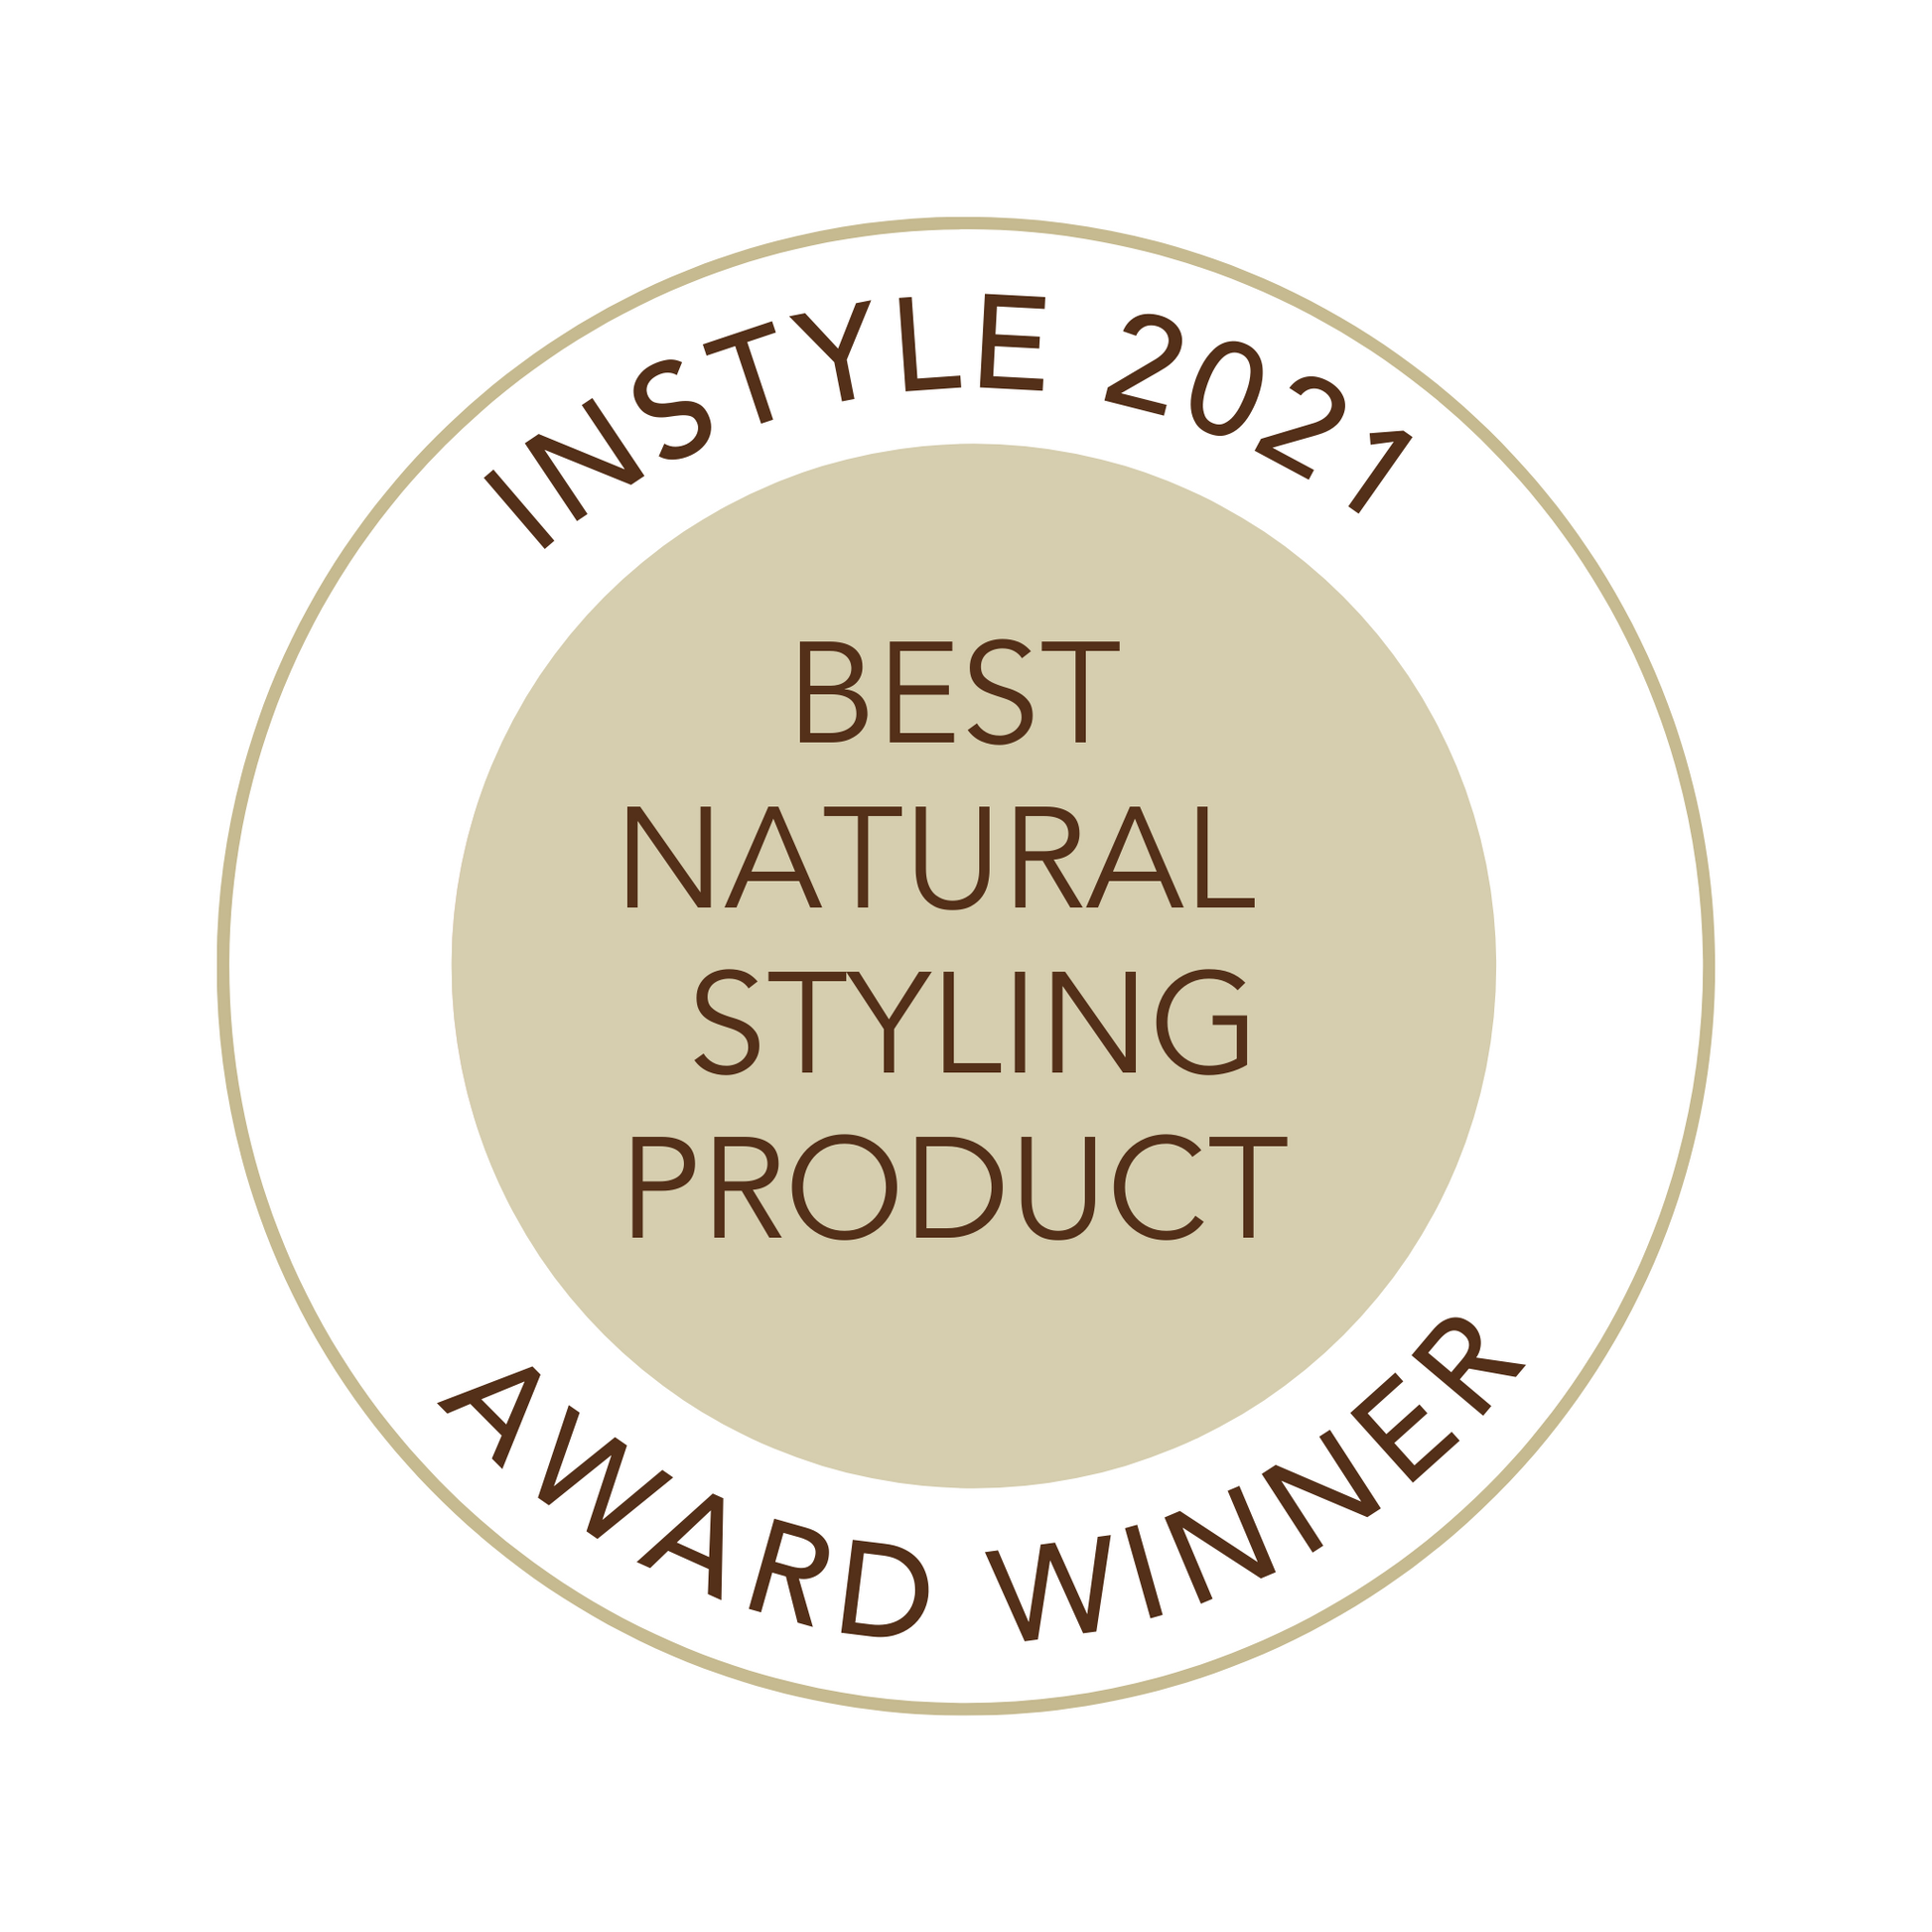 Instyle 2021 Best Natural Styling Product Award Winner